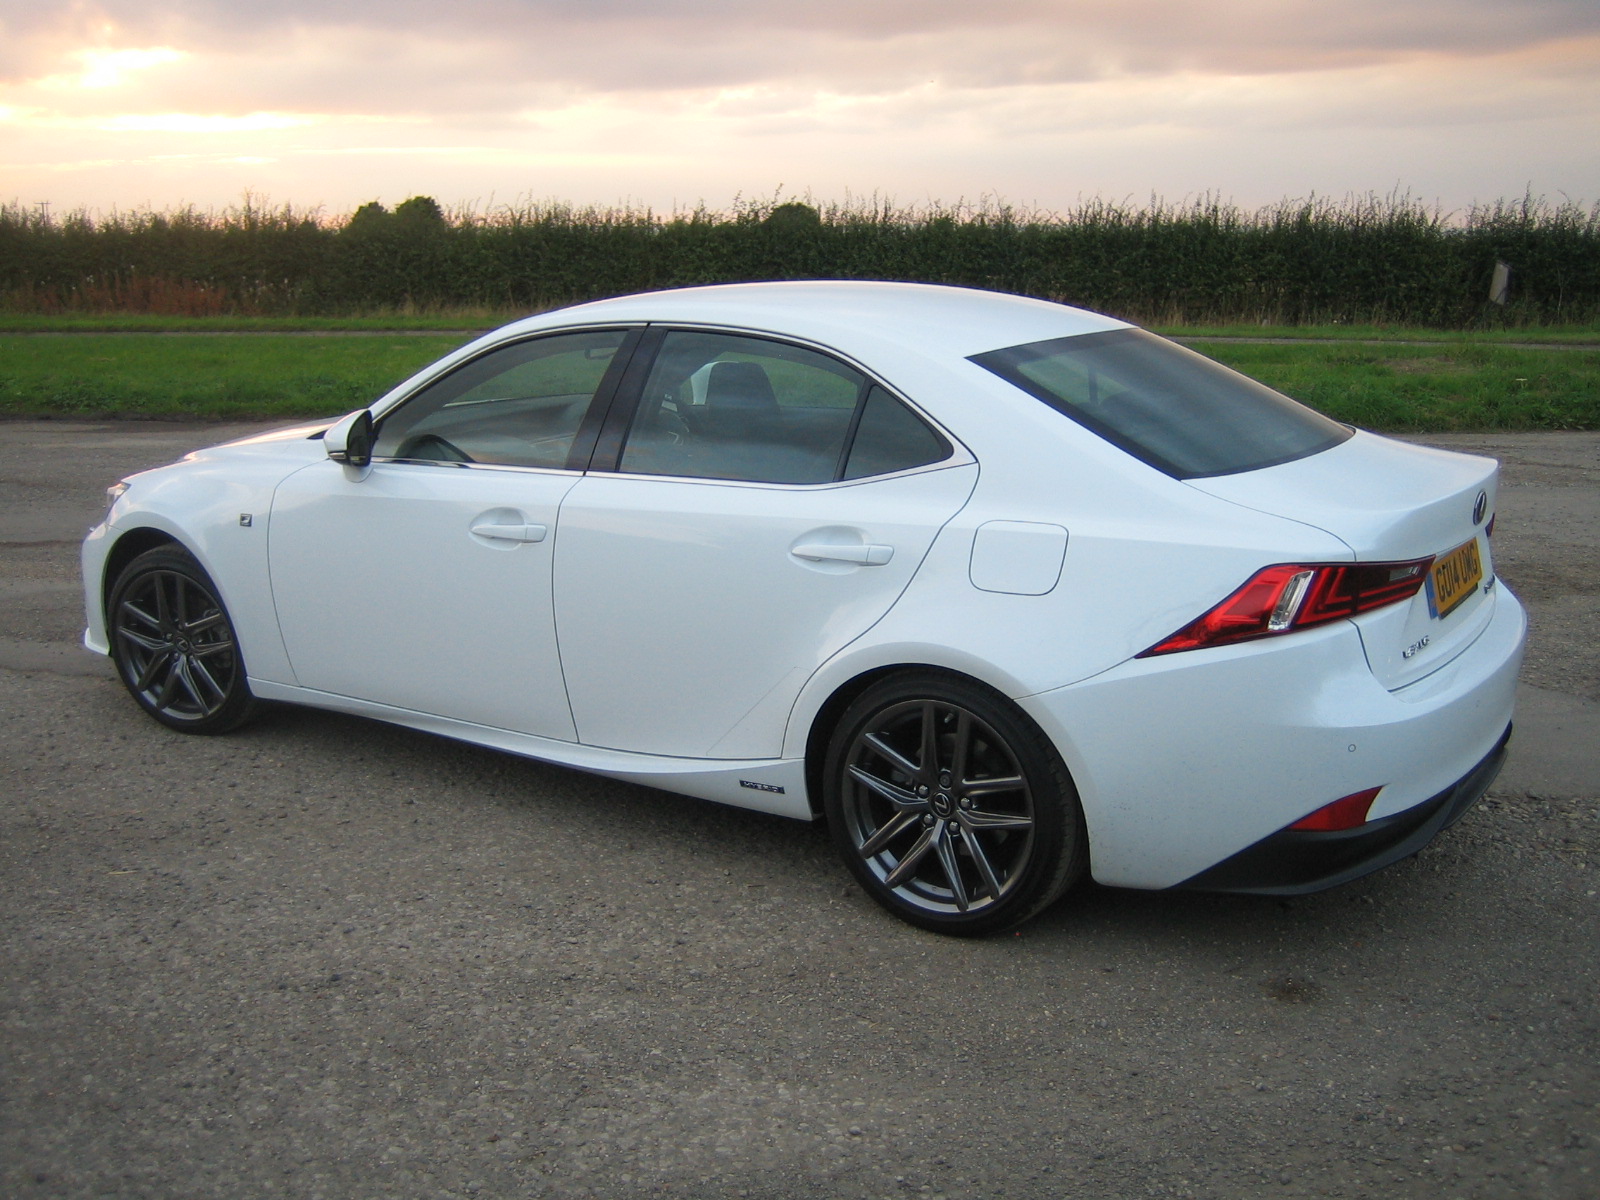 Lexus IS 300h FSport Auto road test report and